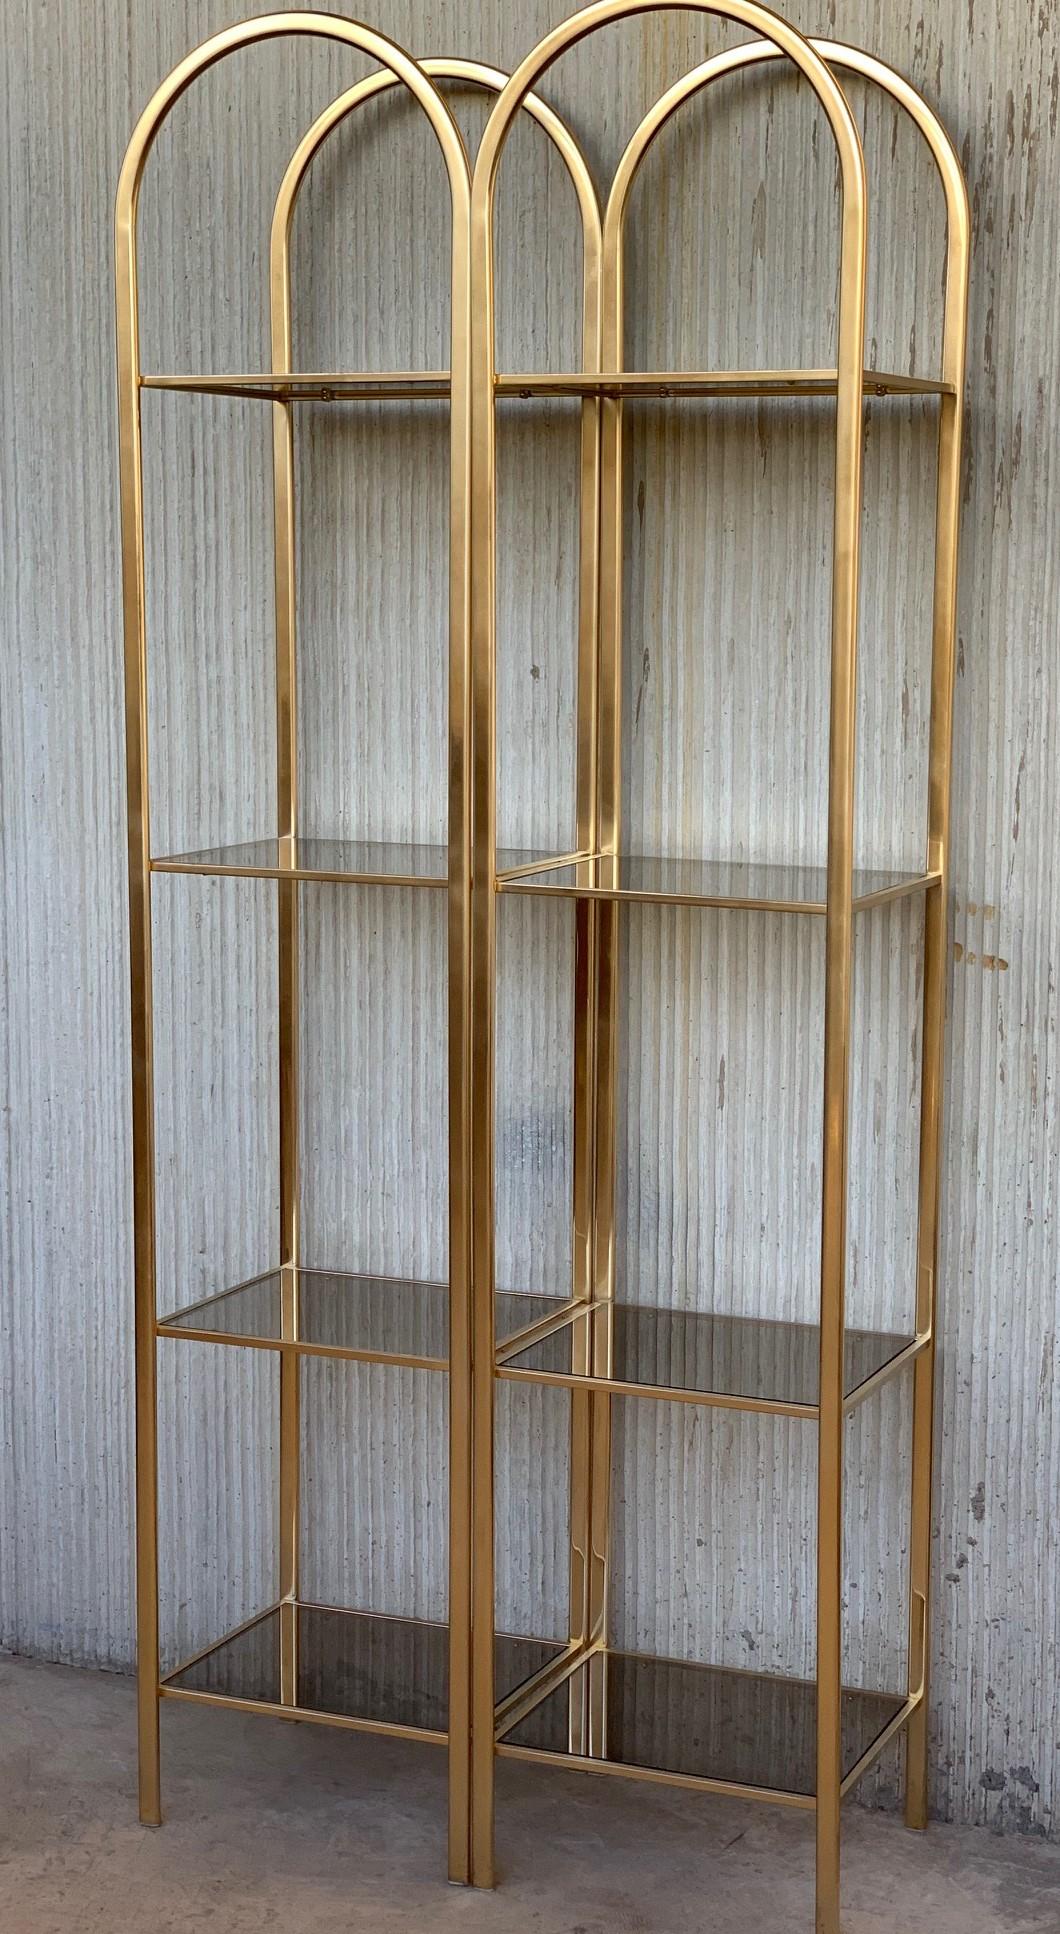 Midcentury pair of brass shelves o étagères with smoked glass
You can remove one metal joint and it disassembled in two shelves.